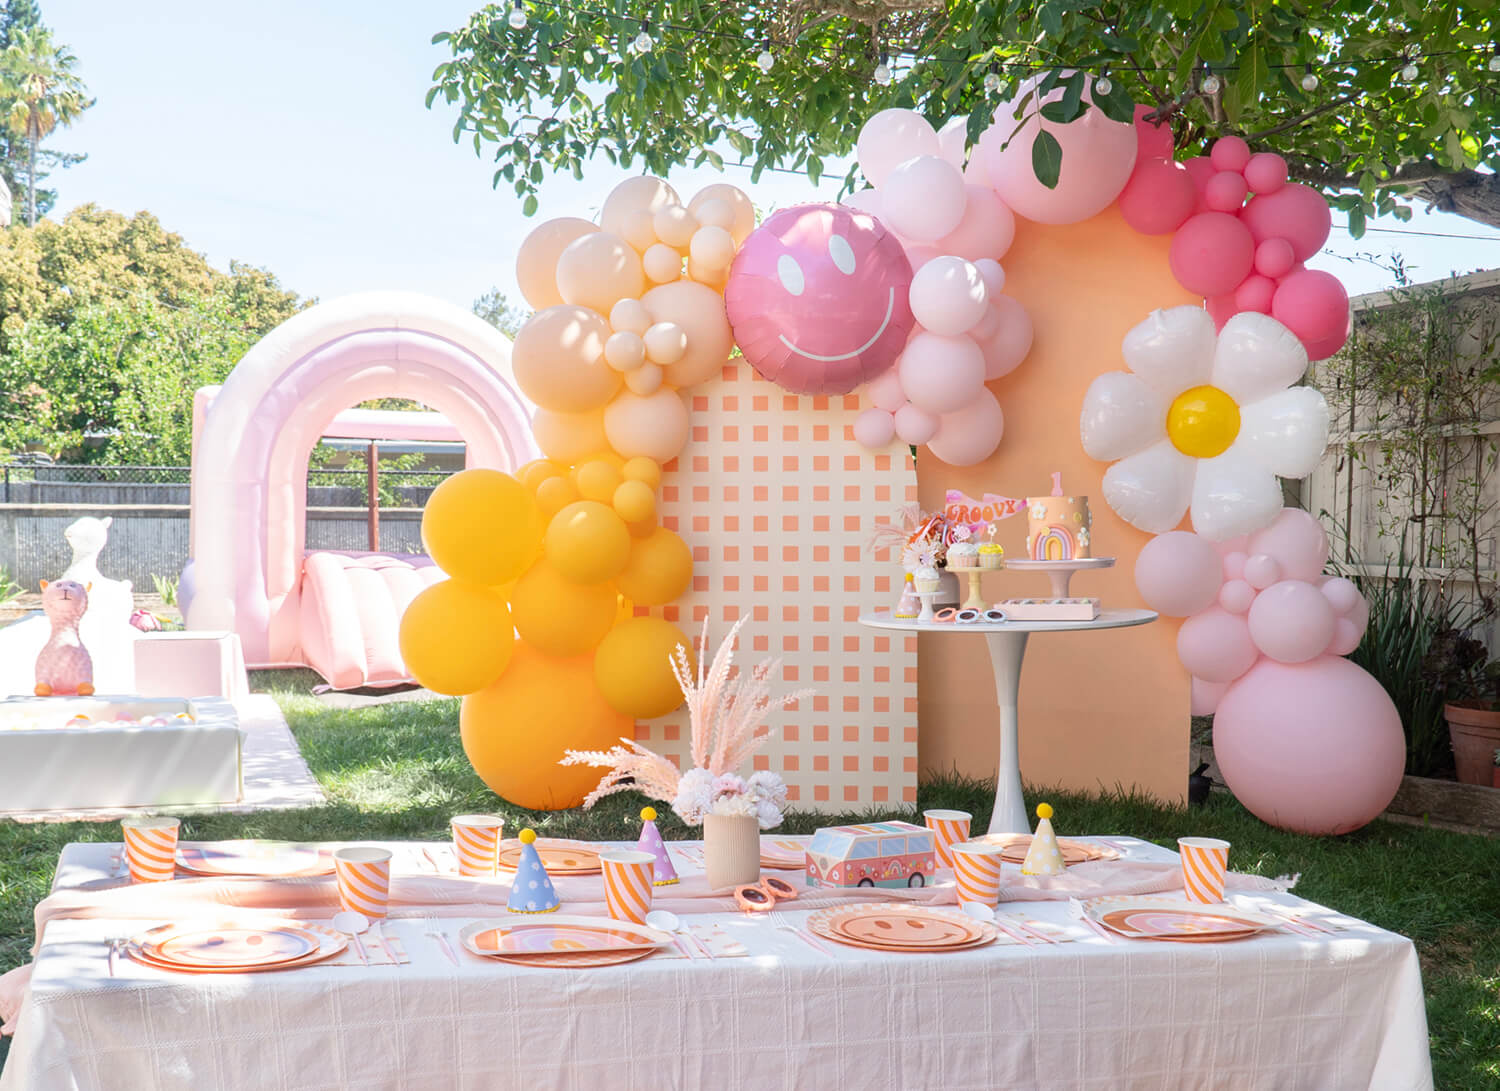 Tablescape with Balloons Centerpiece - Celebrations at Home